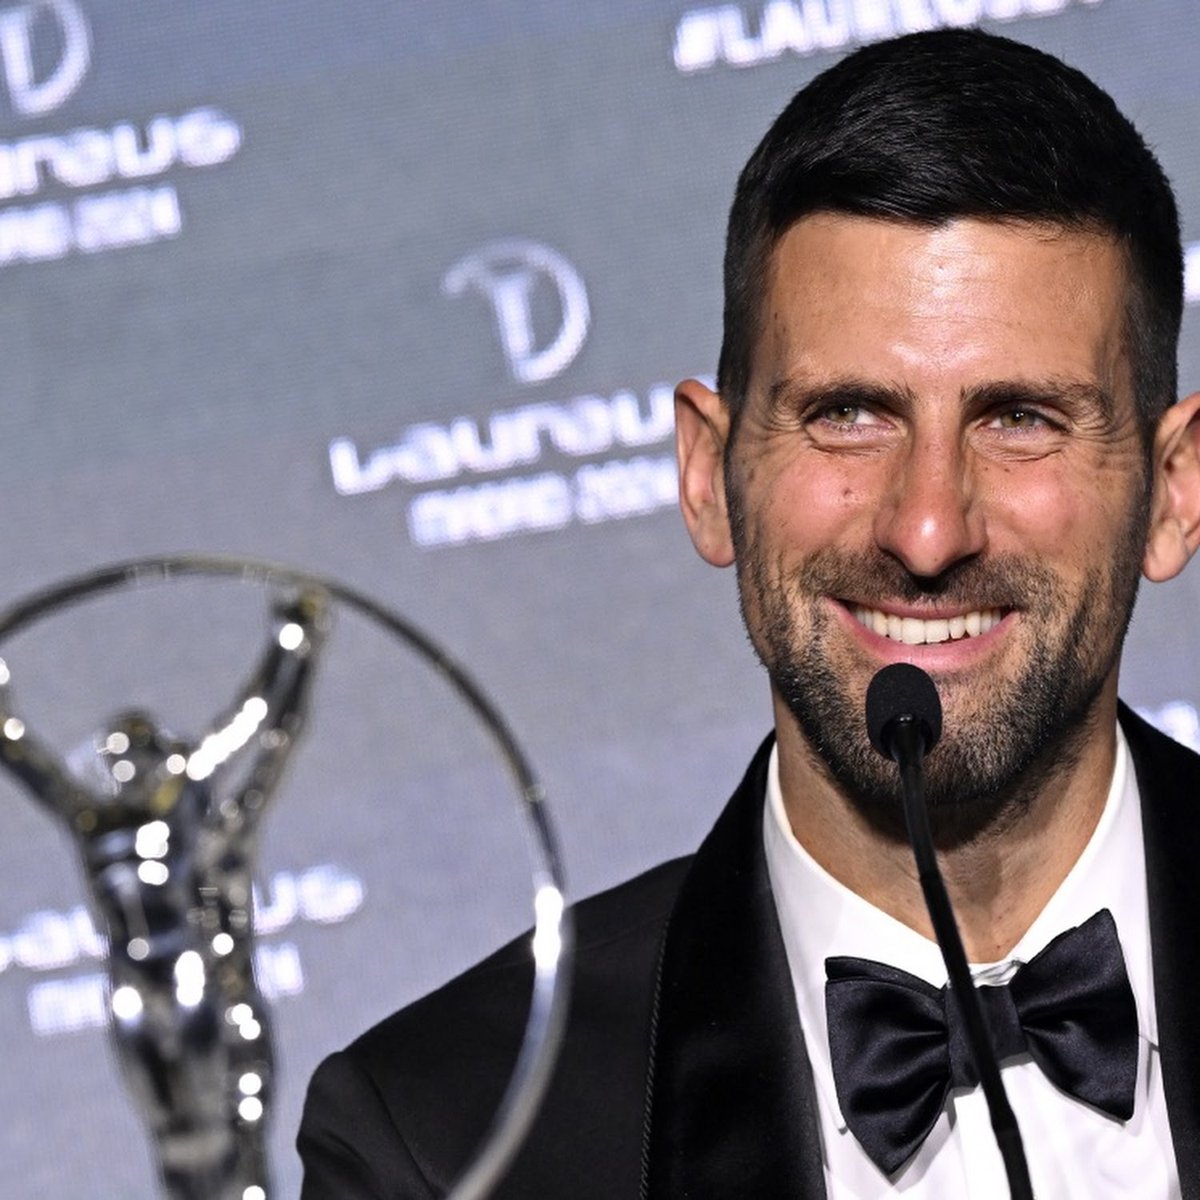 Novak Djokovic starts his 423rd week as the best player in the world today.

That's 8.11 years ranked #1.